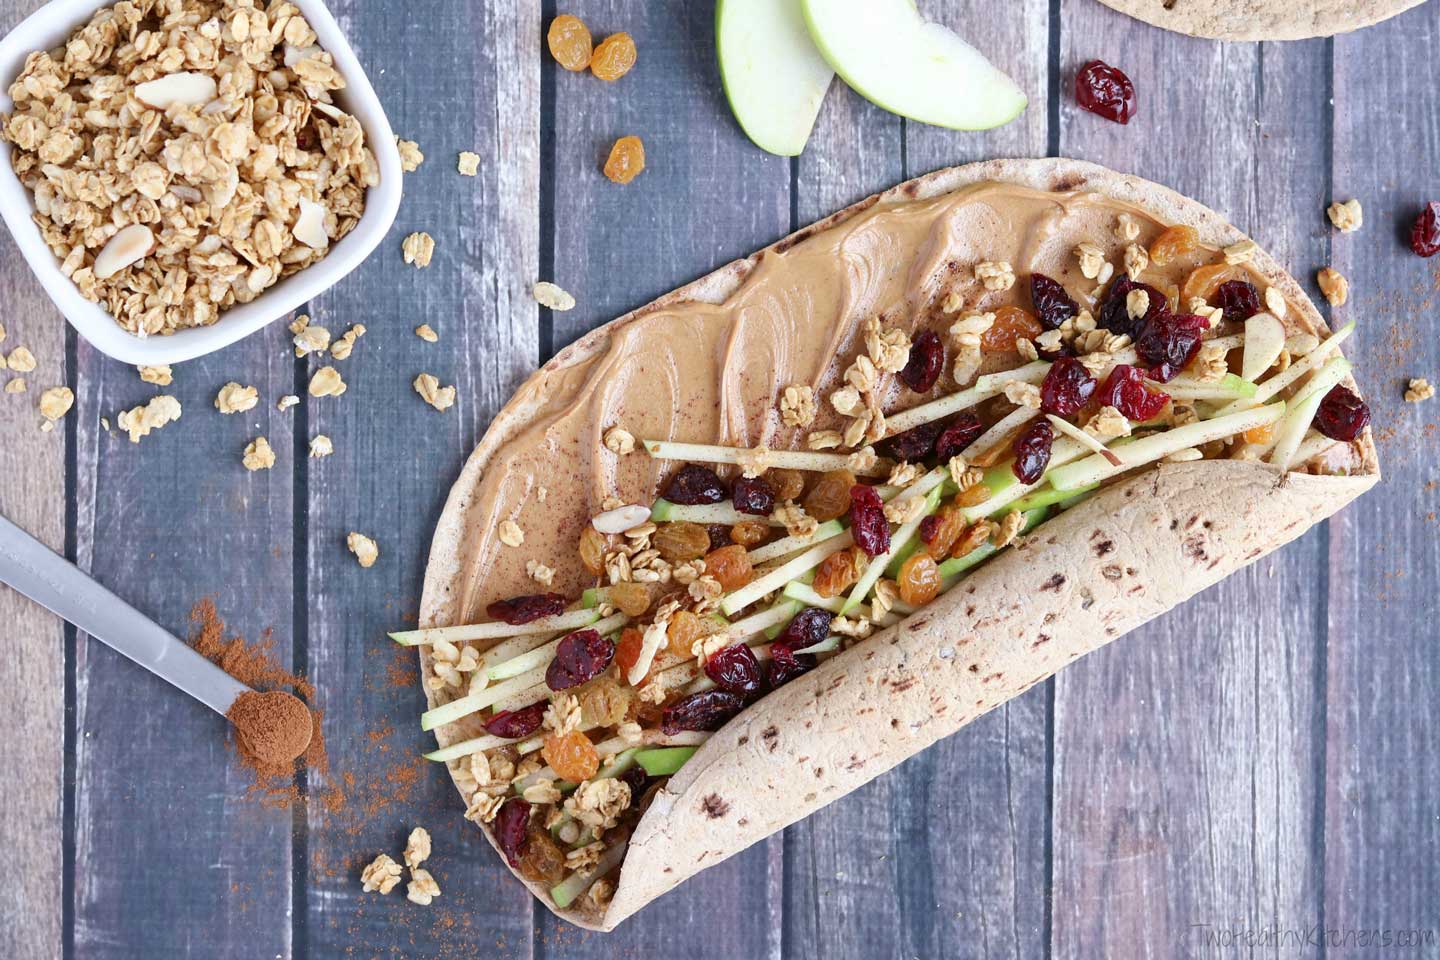 Granola Crunch Apple-Peanut Butter Sandwich Wraps from Two Healthy Kitchens